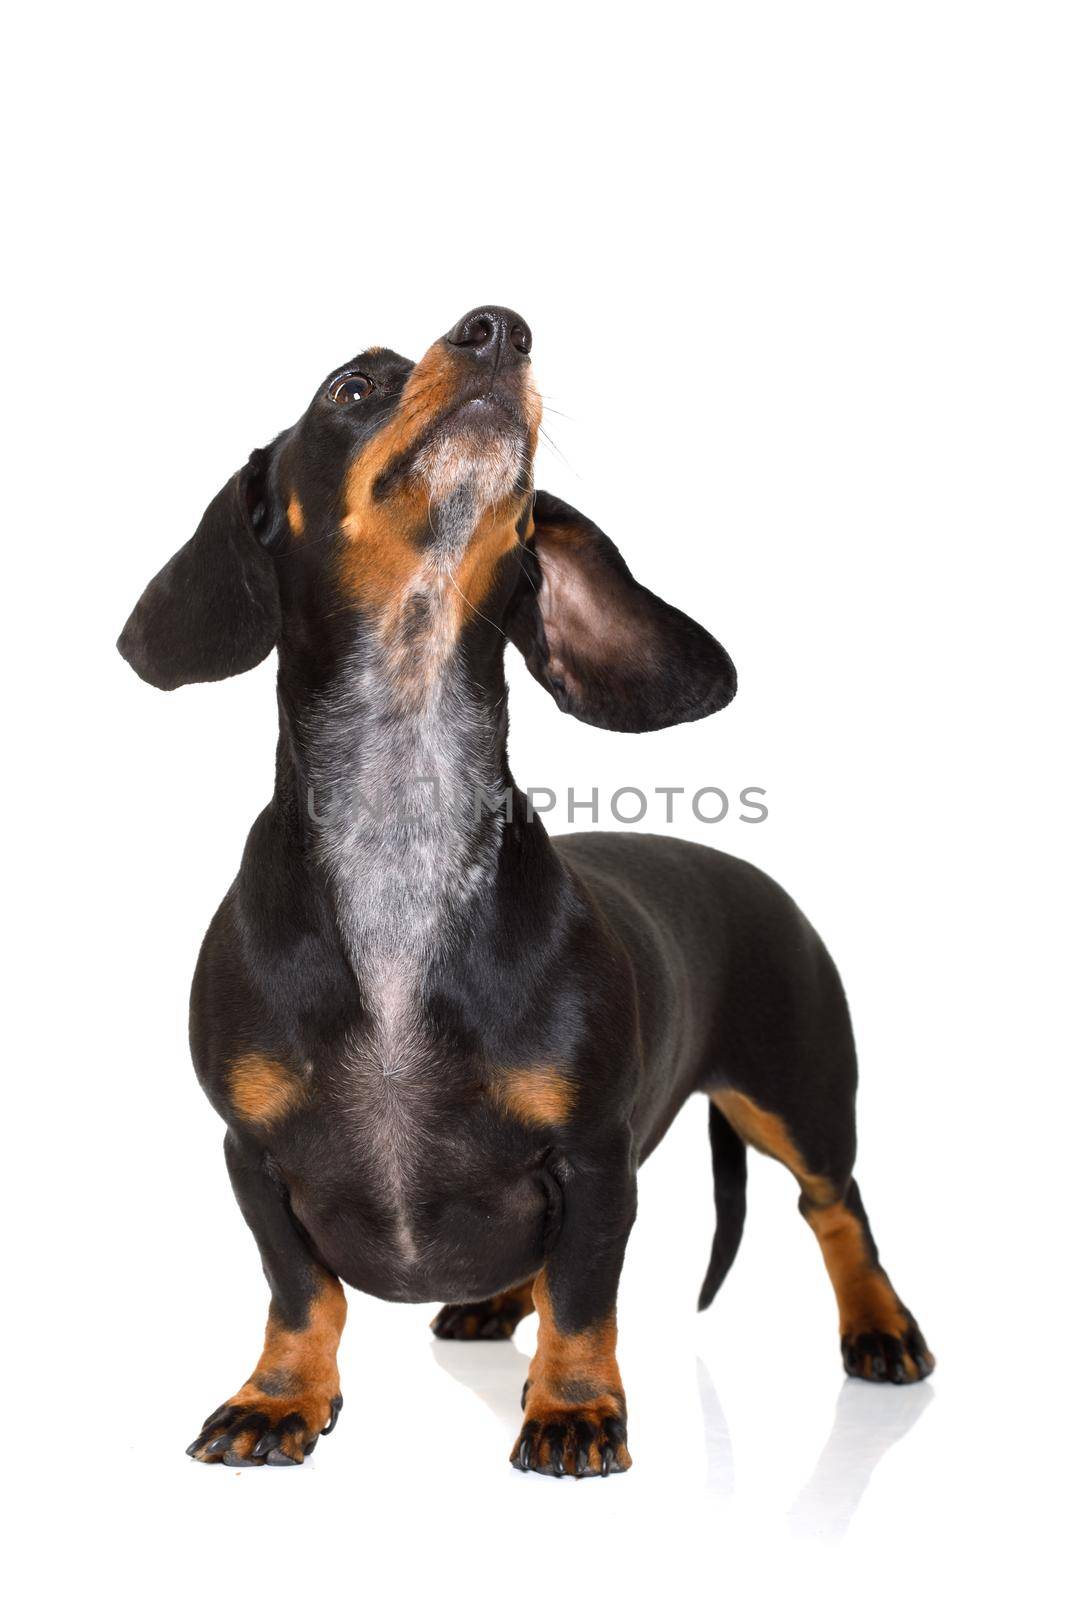 dachshund or sausage dog looking up by Brosch